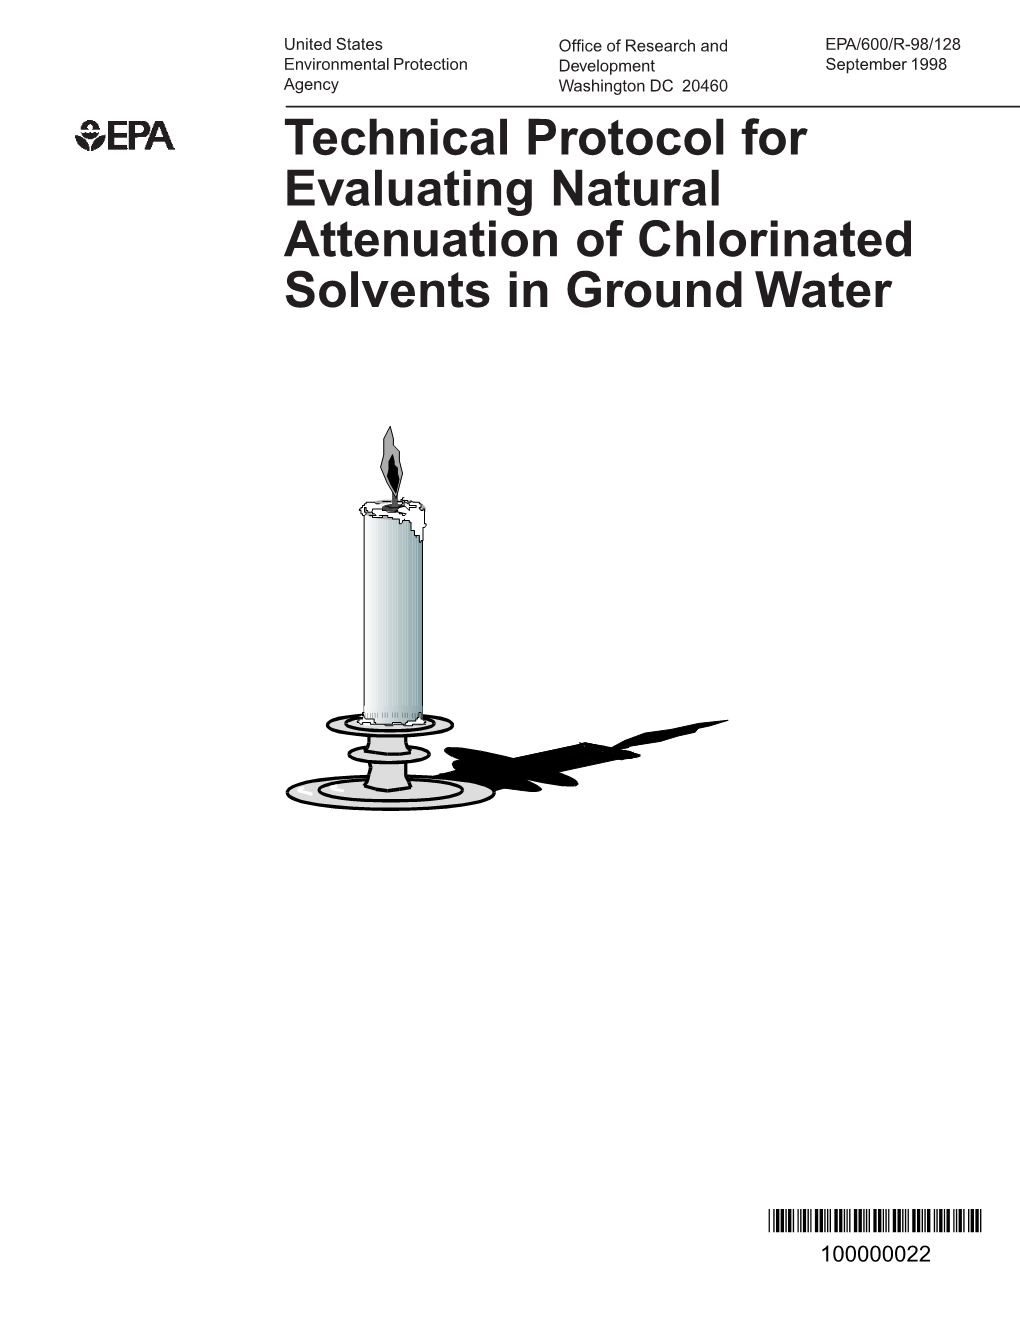 Technical Protocol for Evaluating Natural Attenuation of Chlorinated